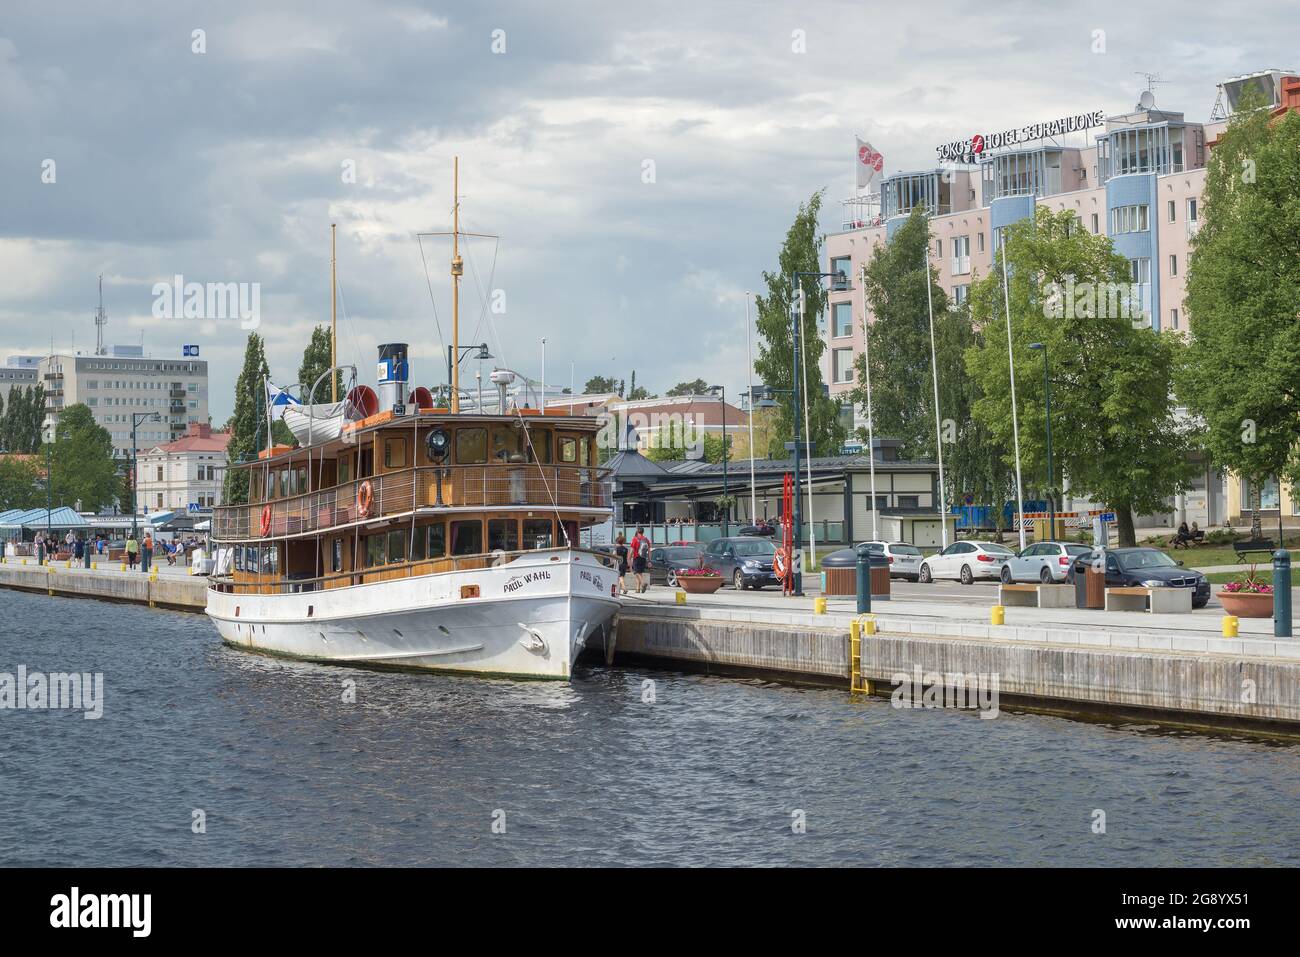 SAVONLINNA, FINLAND - JUNE 17, 2017: Retro steamer Paul Wahl at the city embankment on July afternoon Stock Photo